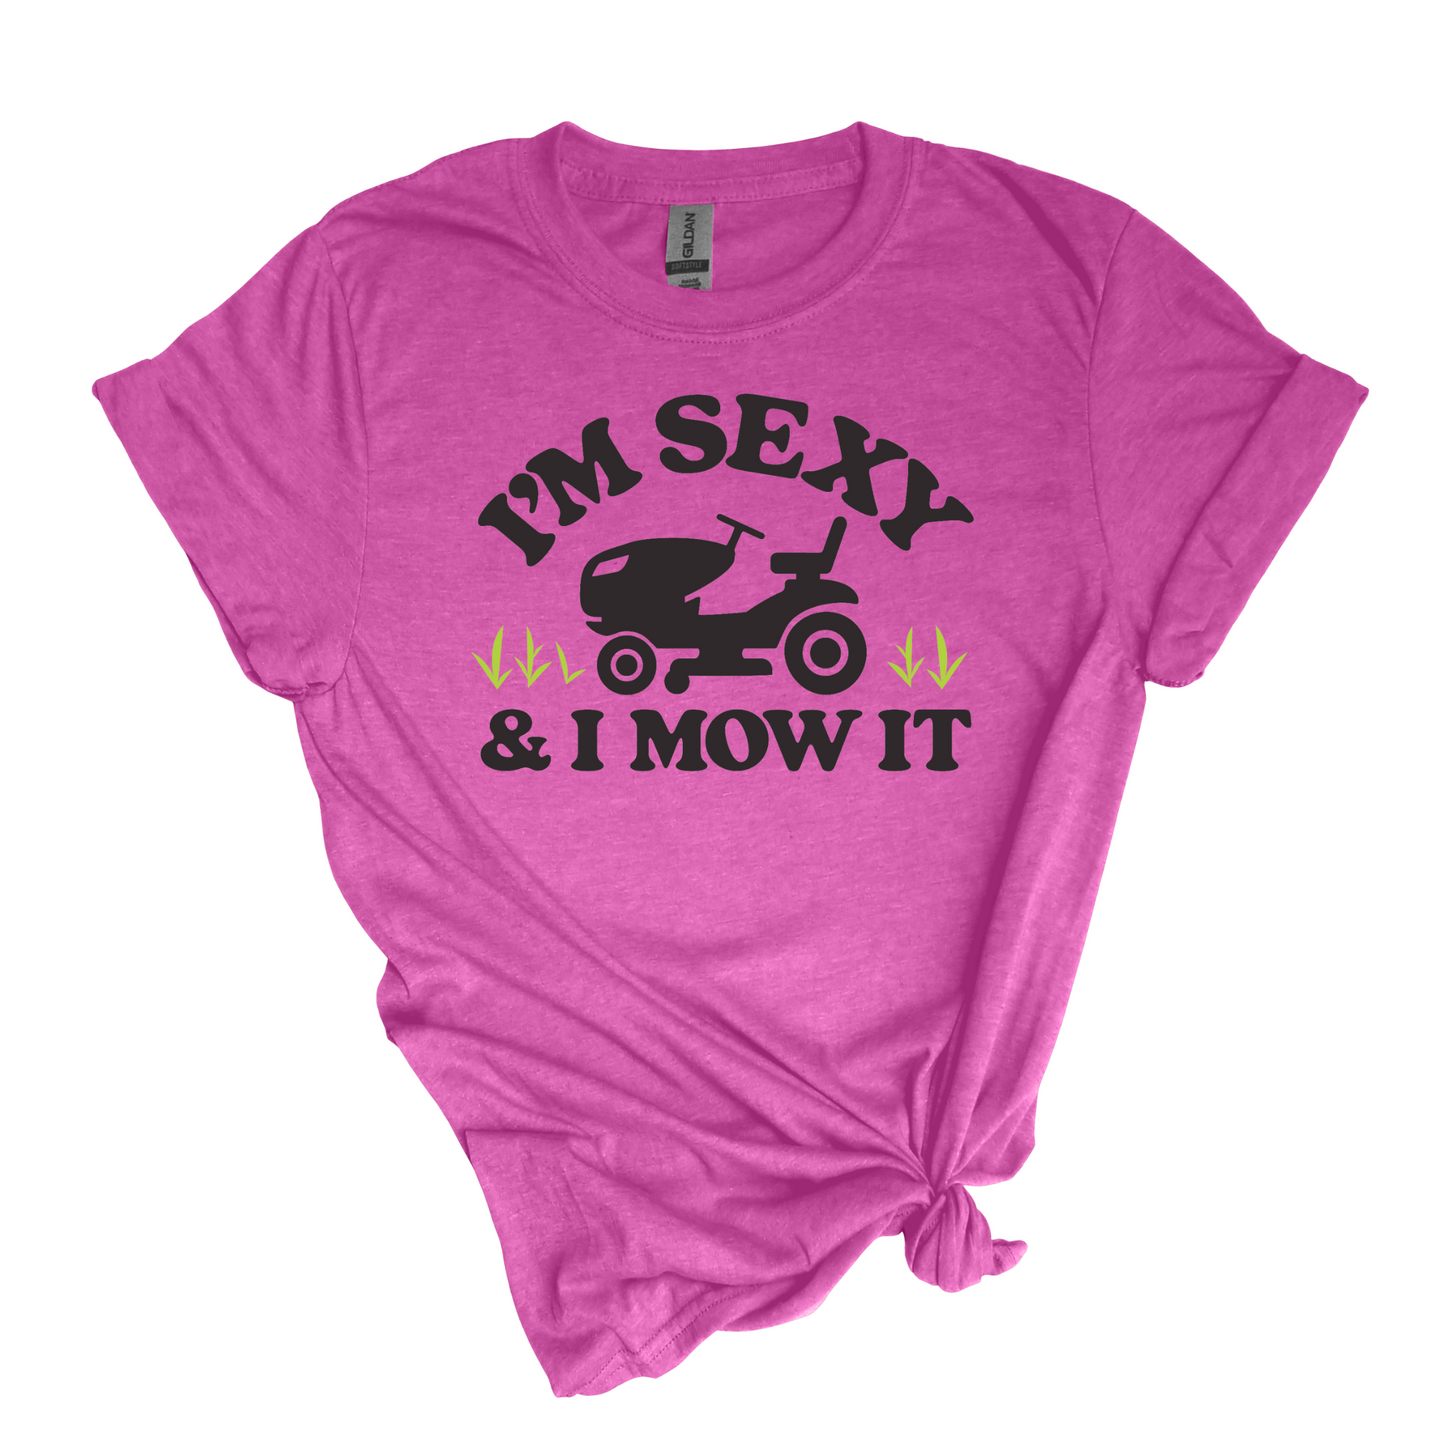 I'm sexy and I mow it - Adult Unisex Soft T-shirt